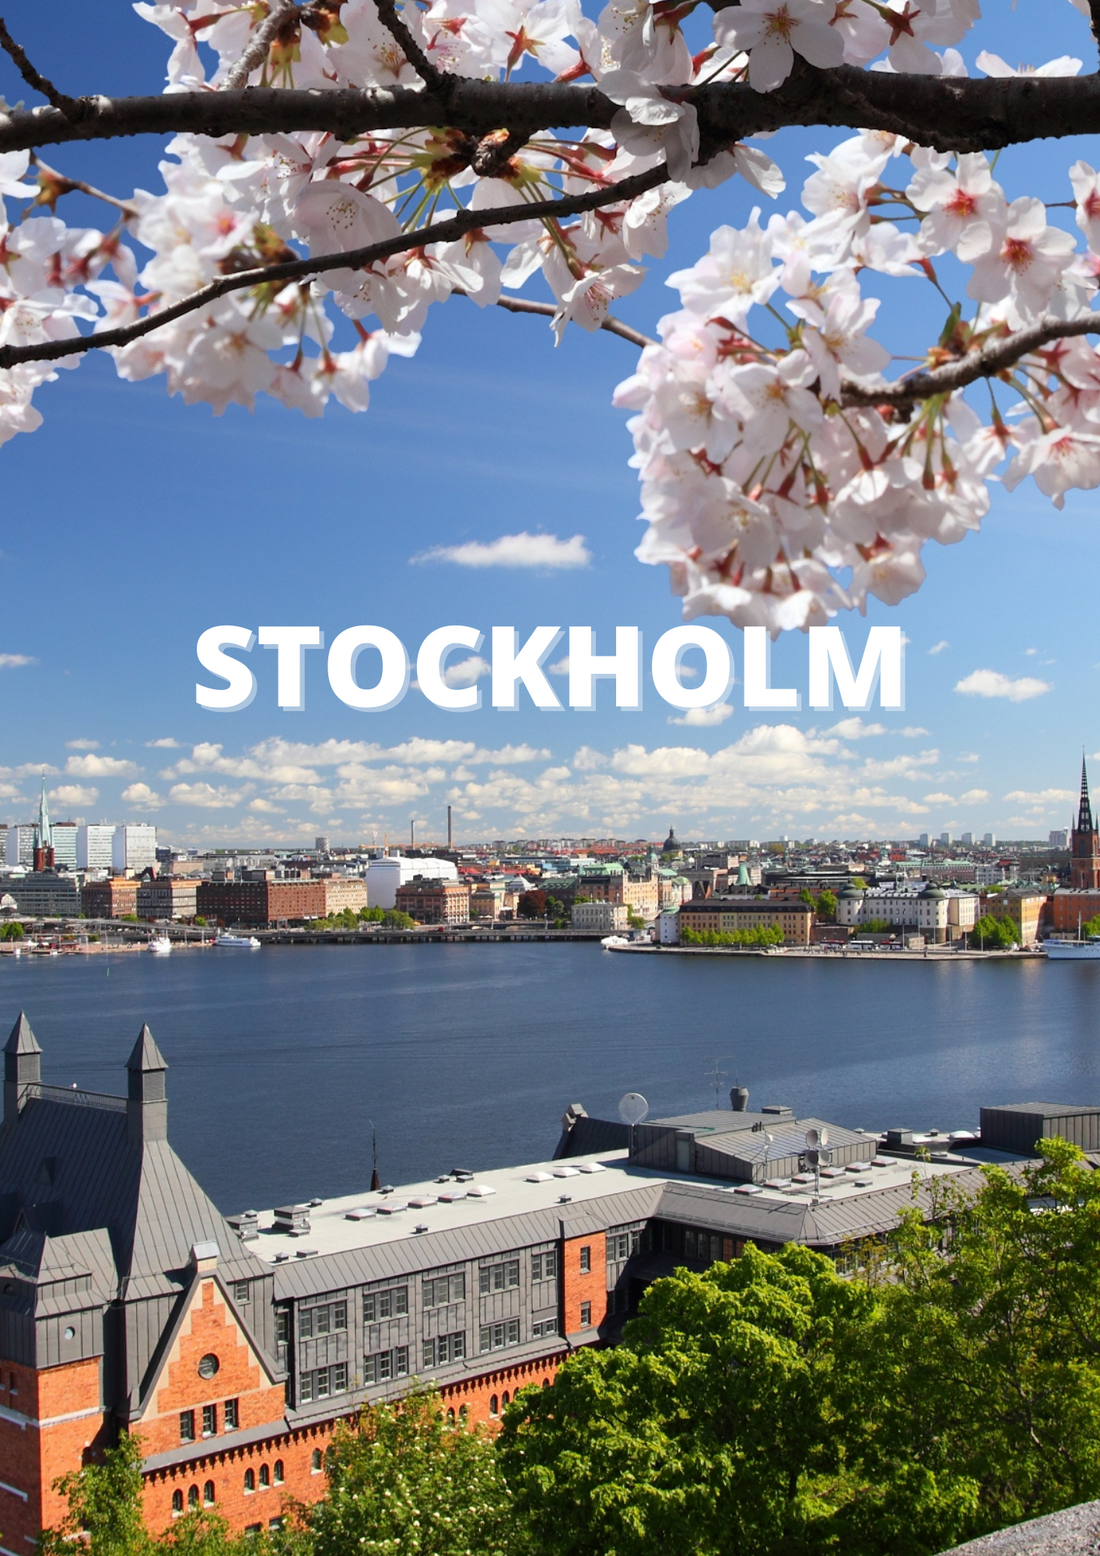 The Stockholm travel guide blog for first-timers